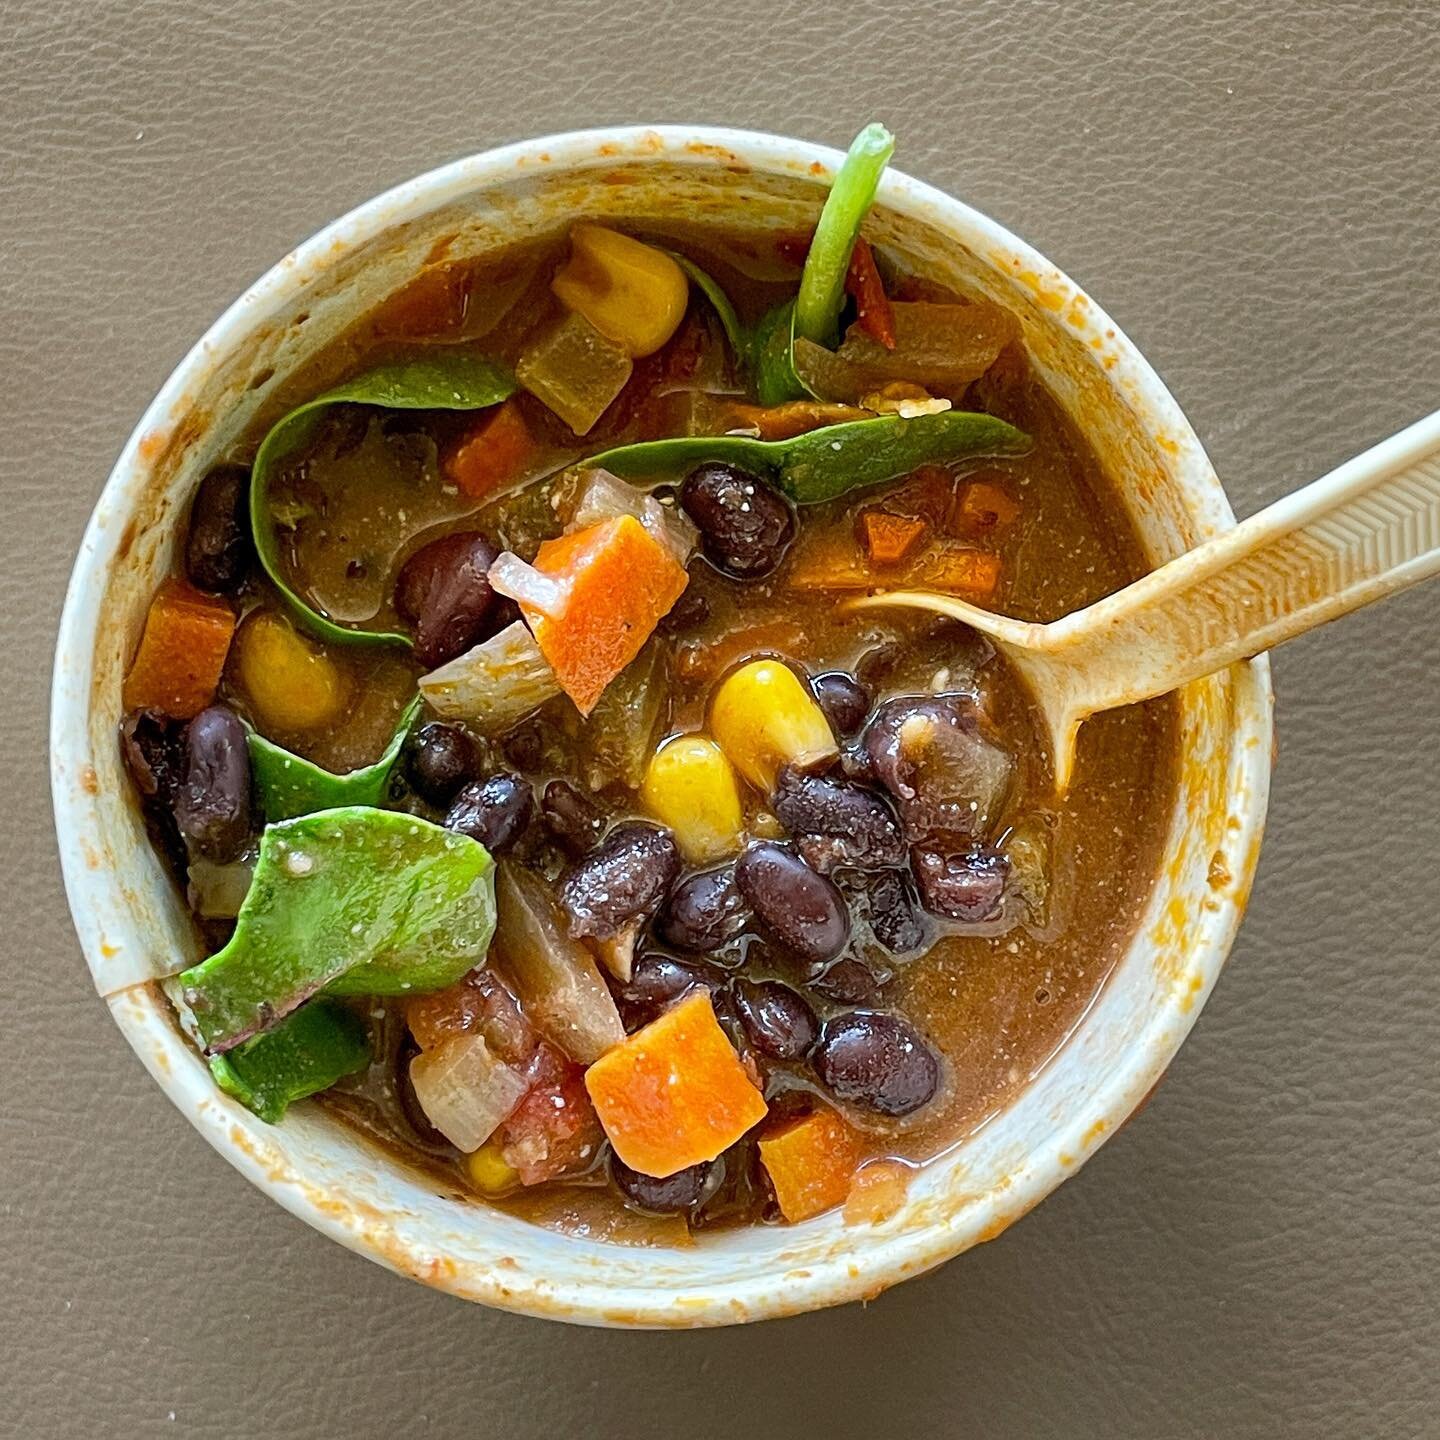 🫘Pro Nutrition Tip: eat beans every day. As a Registered Dietitian, it&rsquo;s the one food I won&rsquo;t go without each day

🫘Got this black bean soup to go for lunch today just for the bean factor

🫘Beans are high in fiber &amp; protein, cheap,